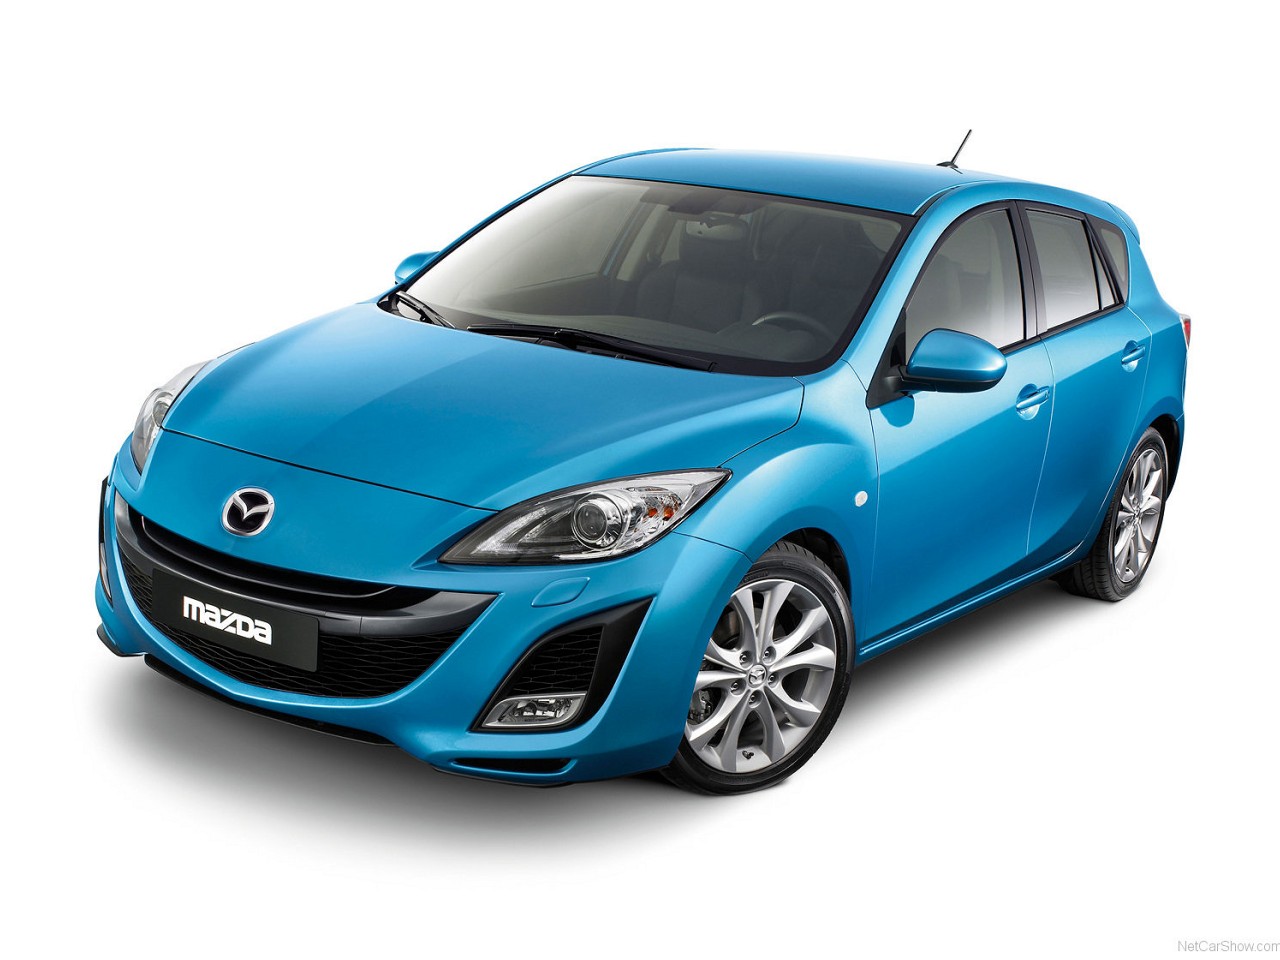 2010 Mazda 3 Pictures